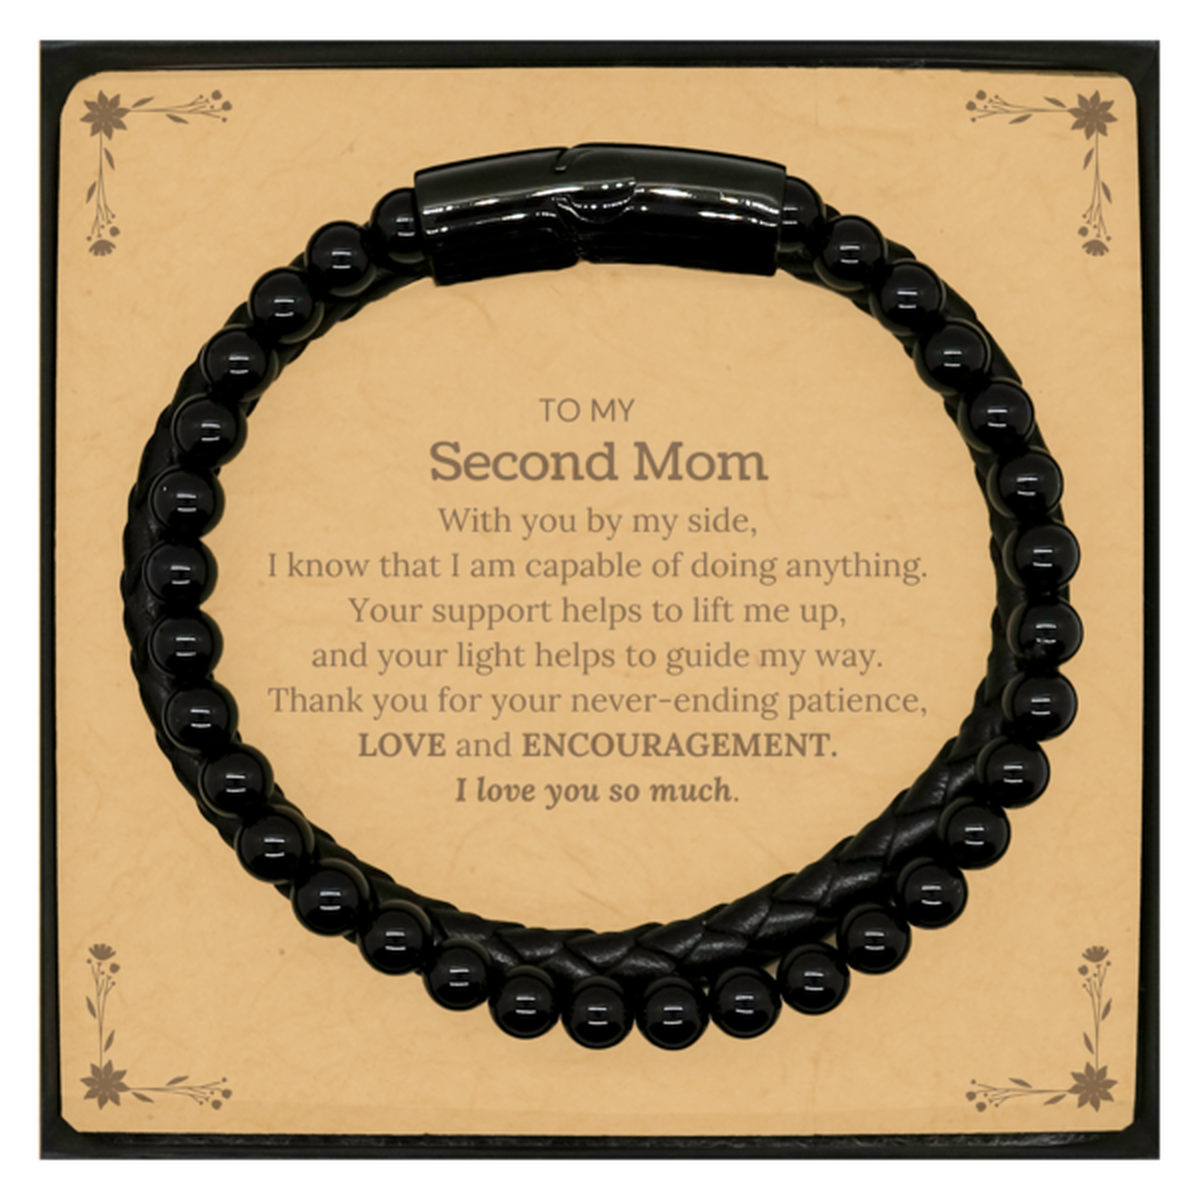 Appreciation Second Mom Stone Leather Bracelets Gifts, To My Second Mom Birthday Christmas Wedding Keepsake Gifts for Second Mom With you by my side, I know that I am capable of doing anything. I love you so much